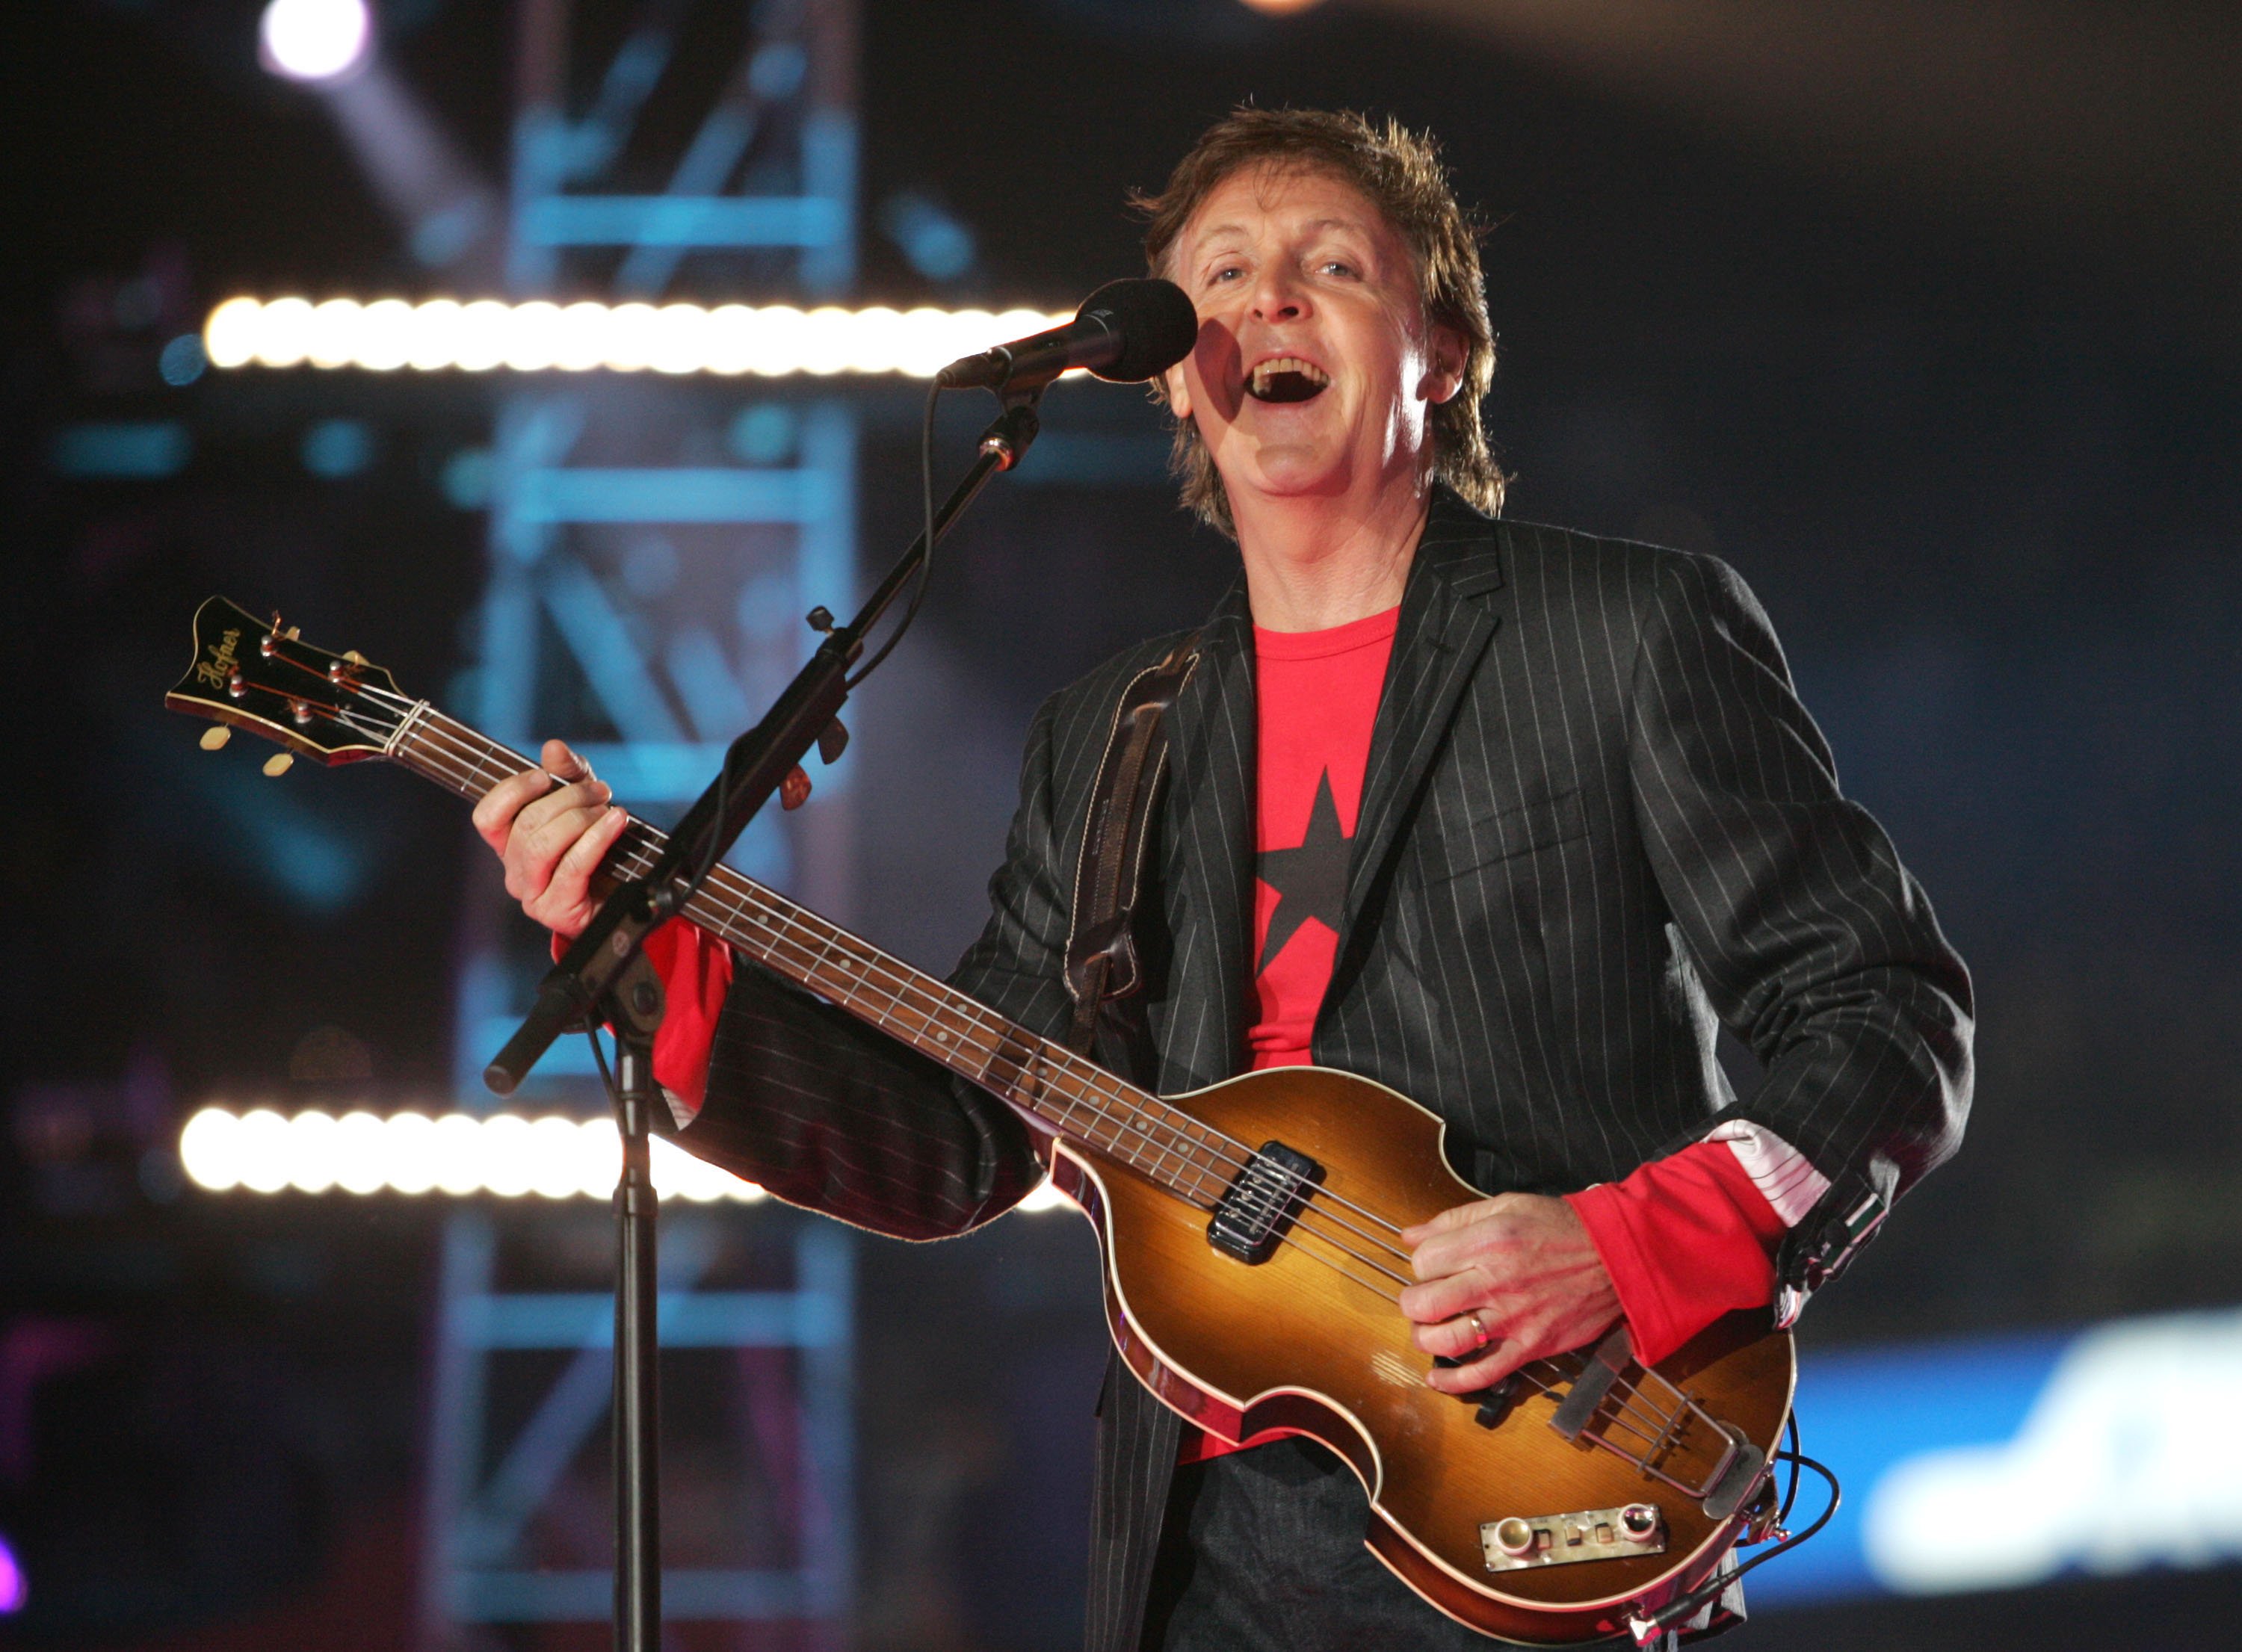 Paul McCartney performs songs at the Super Bowl halftime show in Jacksonville, Florida